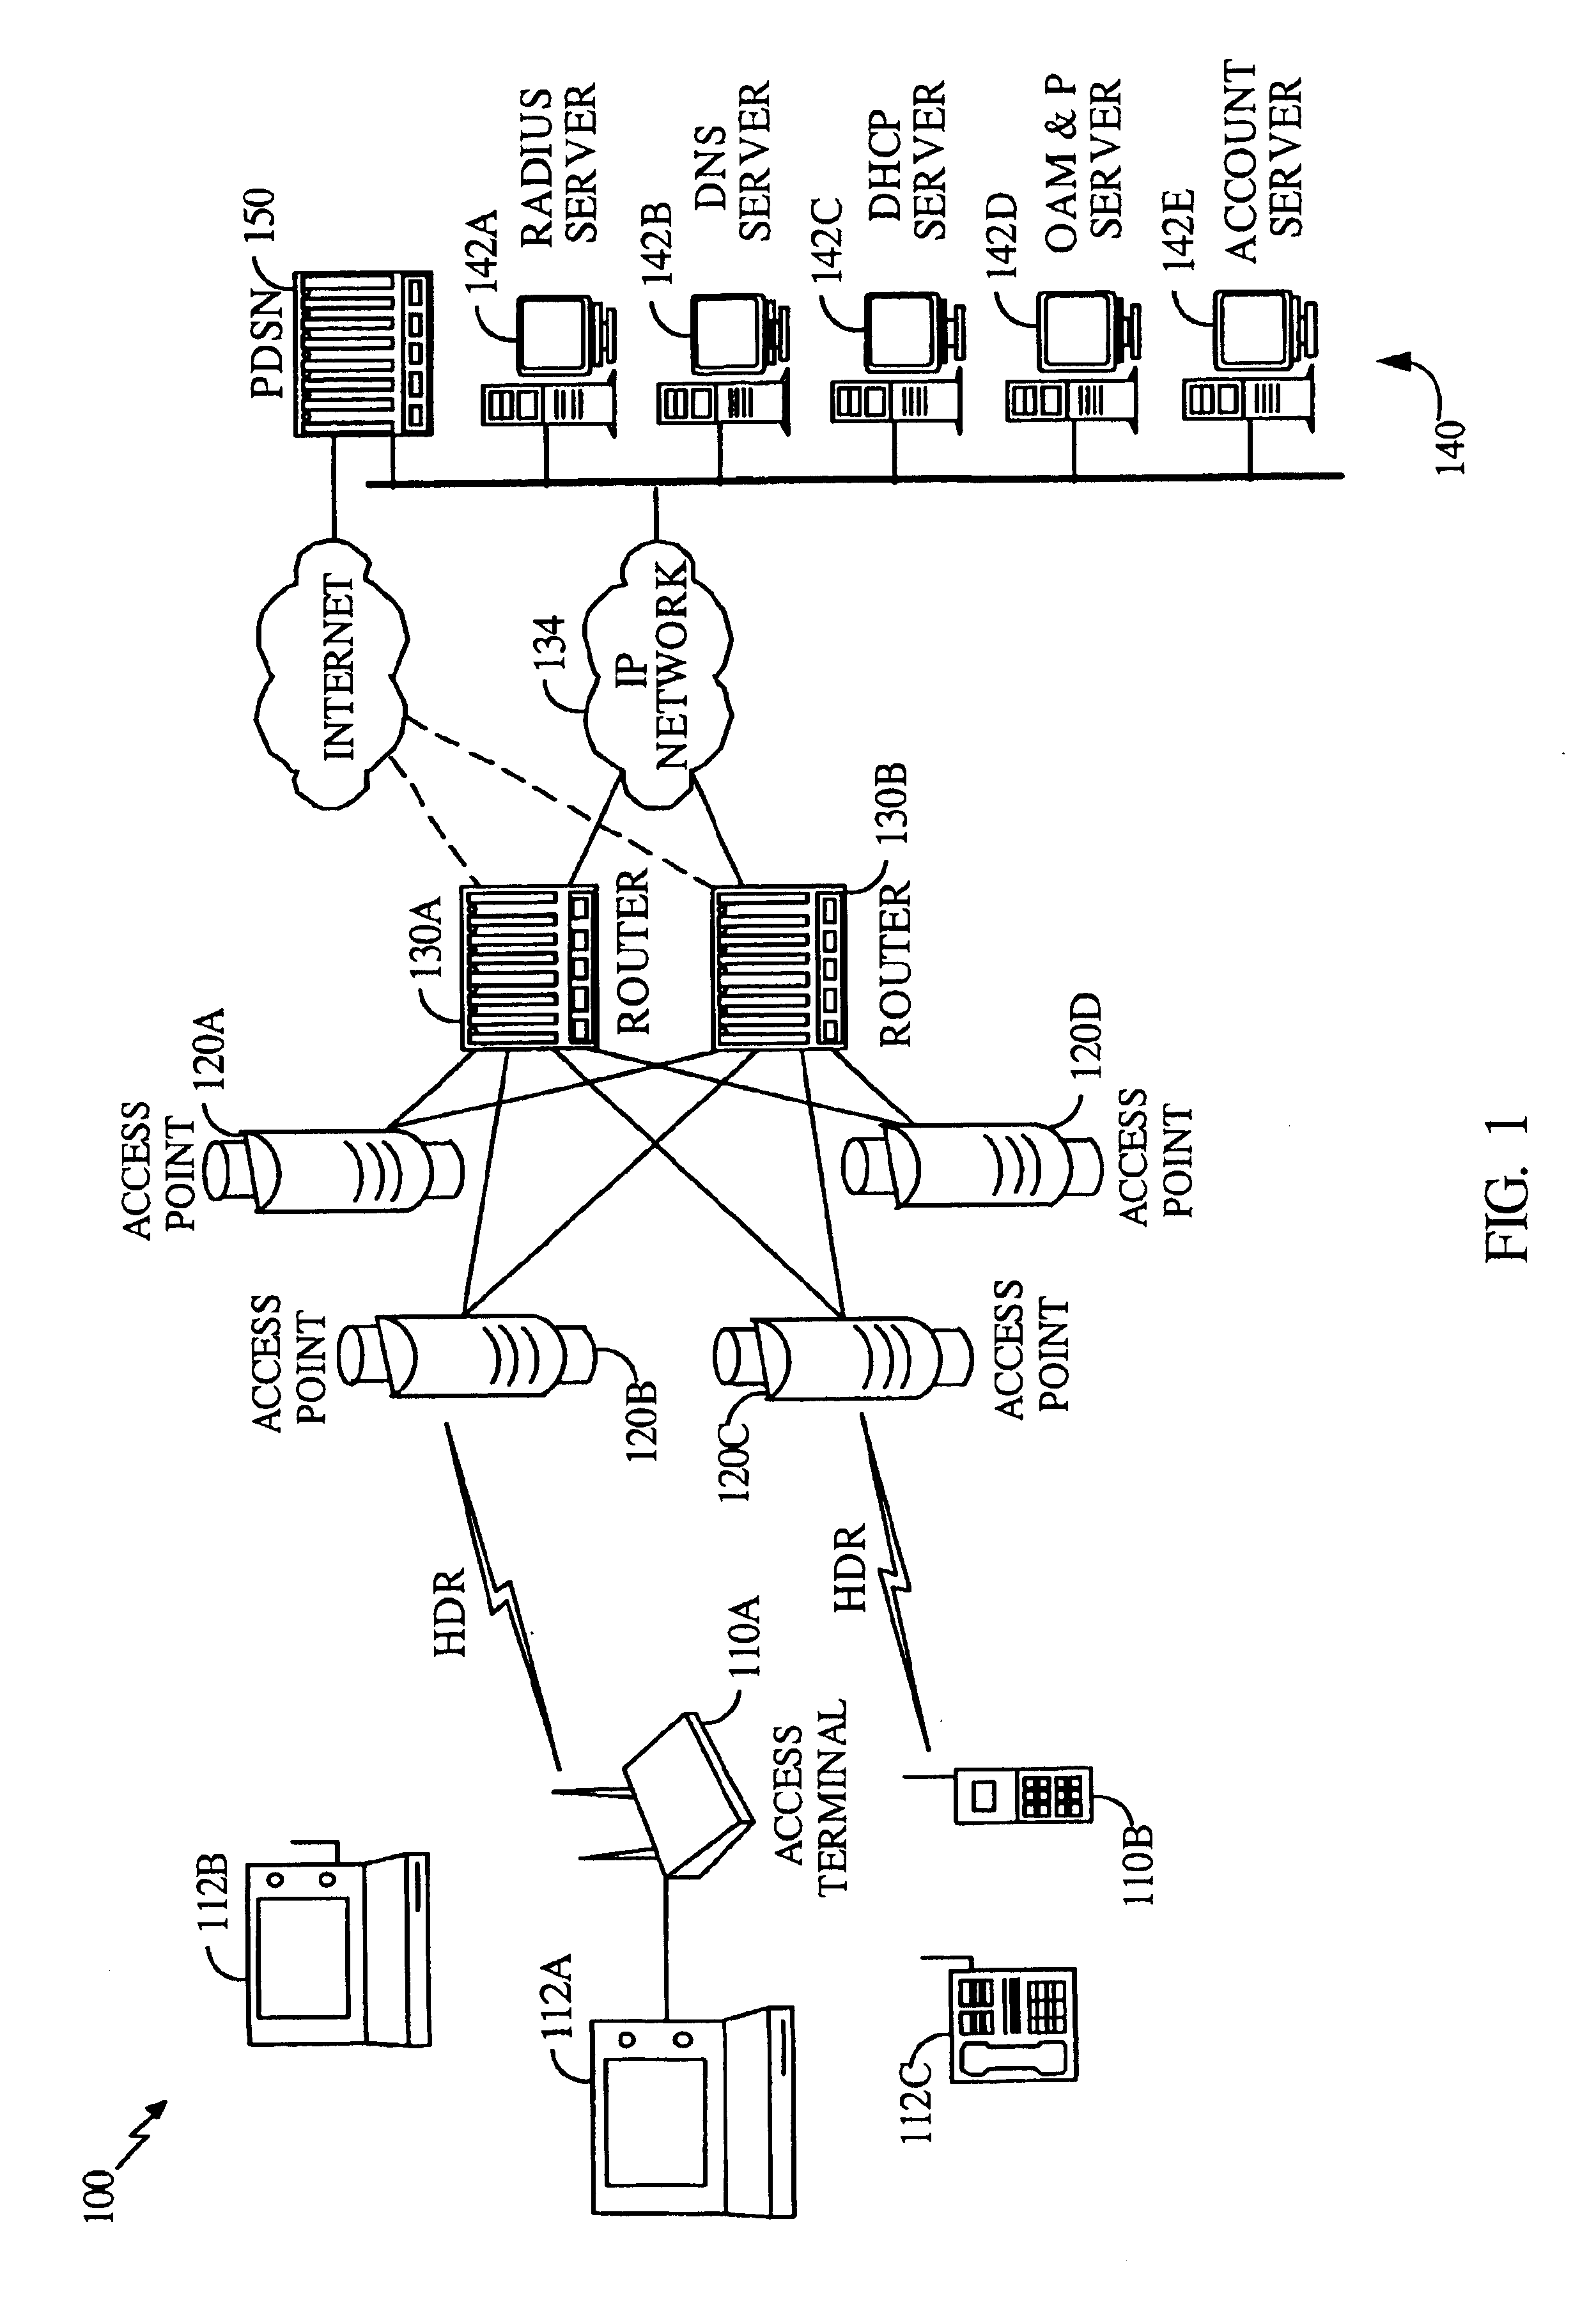 High data rate wireless packet data communications system